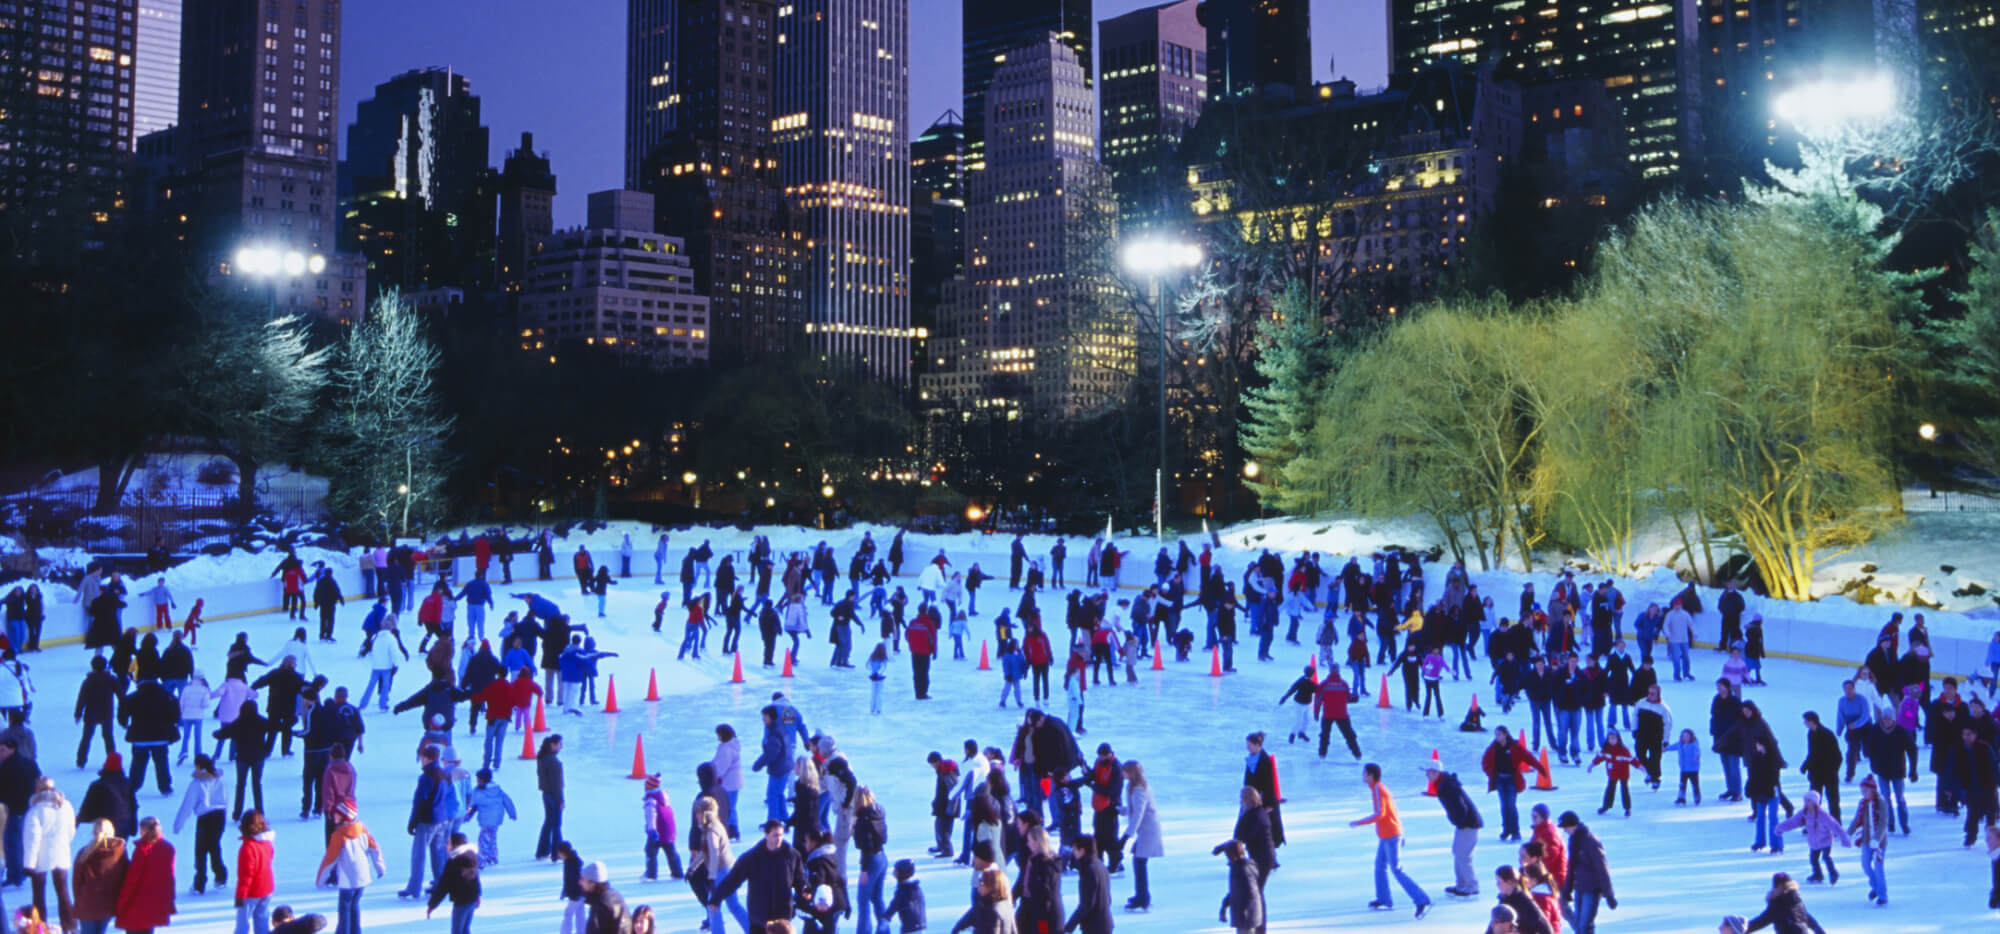 Wollman Ice Rink in Central Park